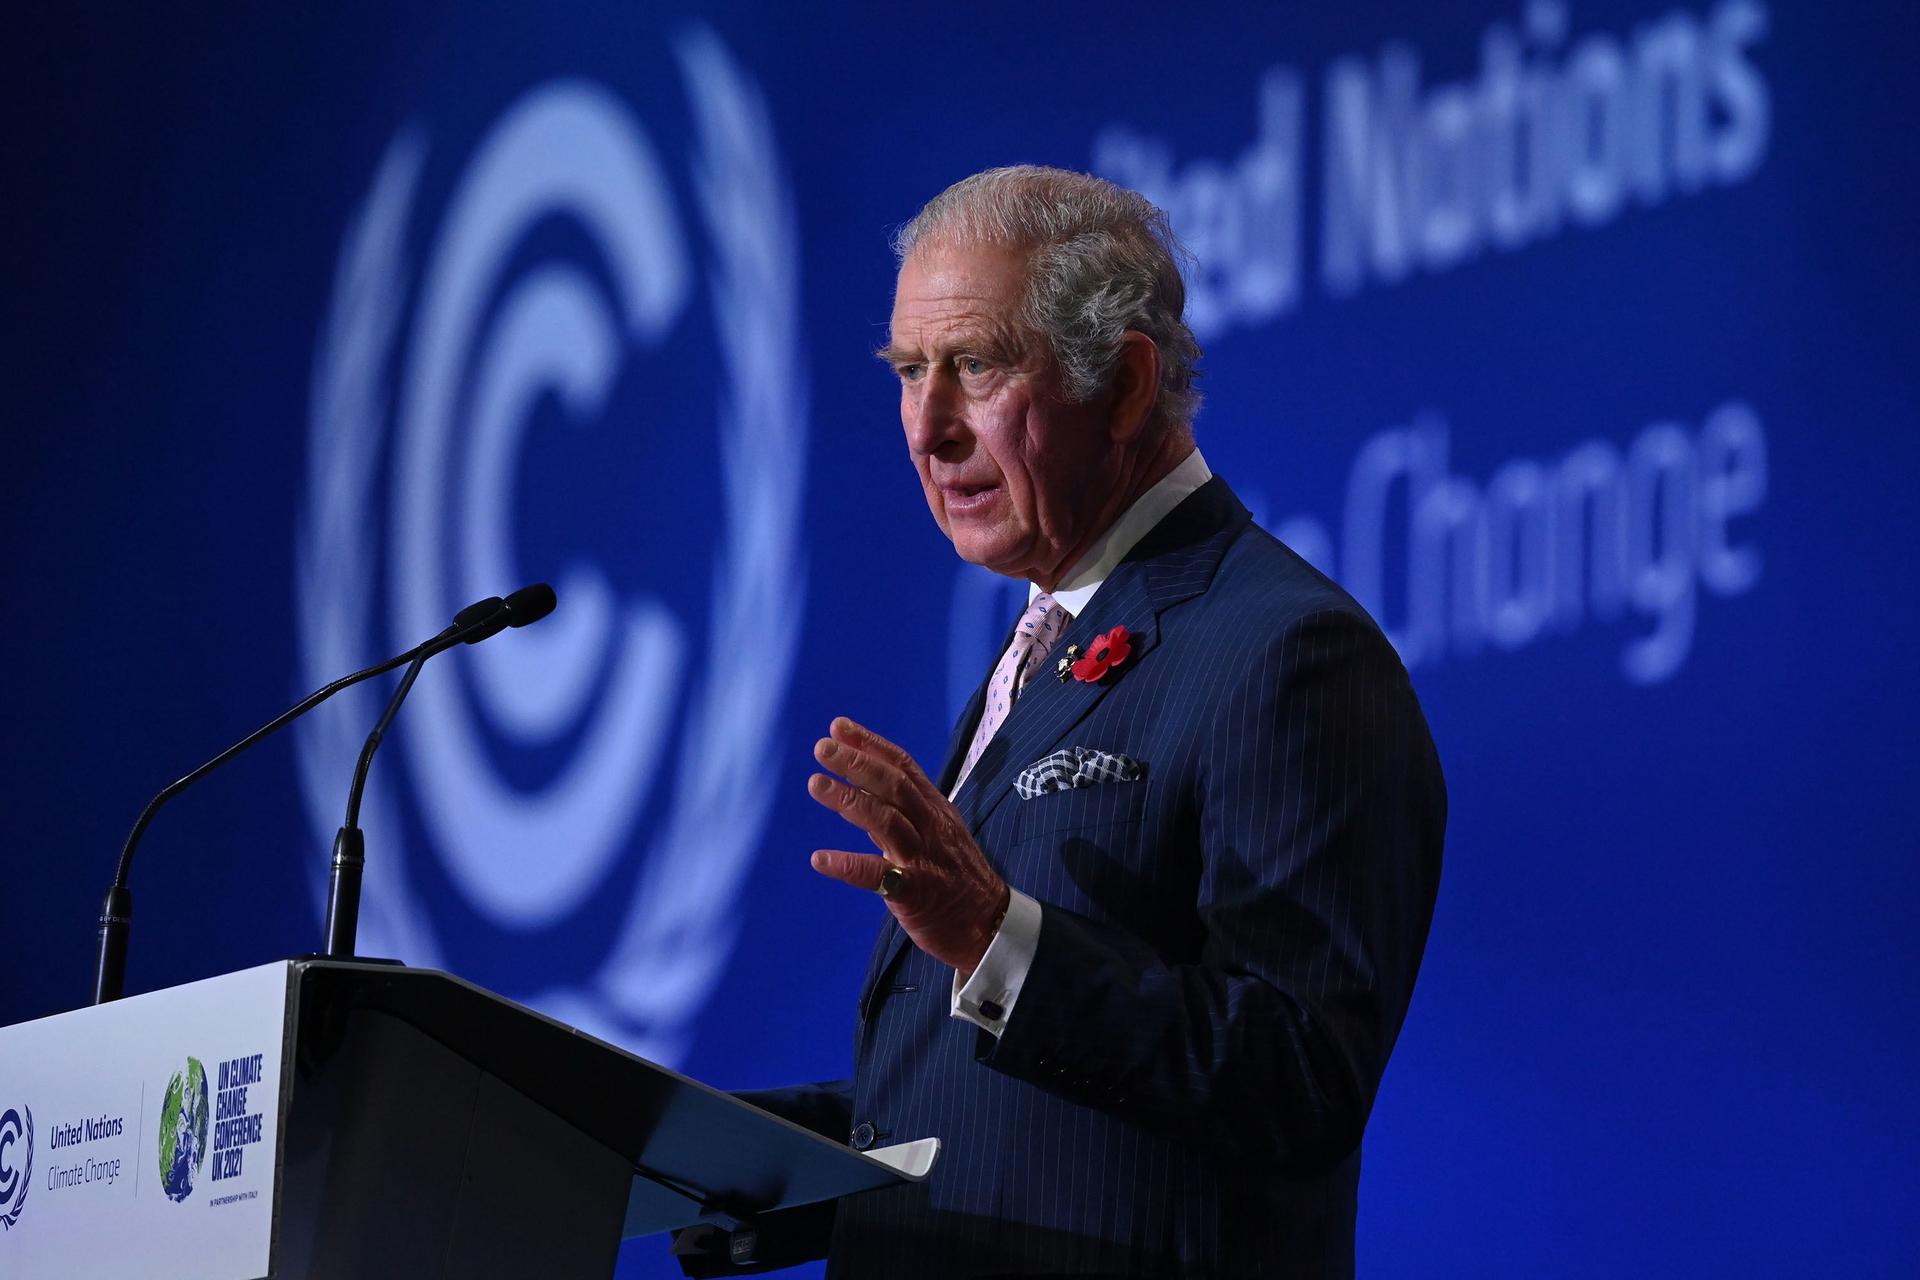 King Charles III, while still Prince of Wales, delivers the opening address at COP26 in Glasgow, Scotland in 2021.